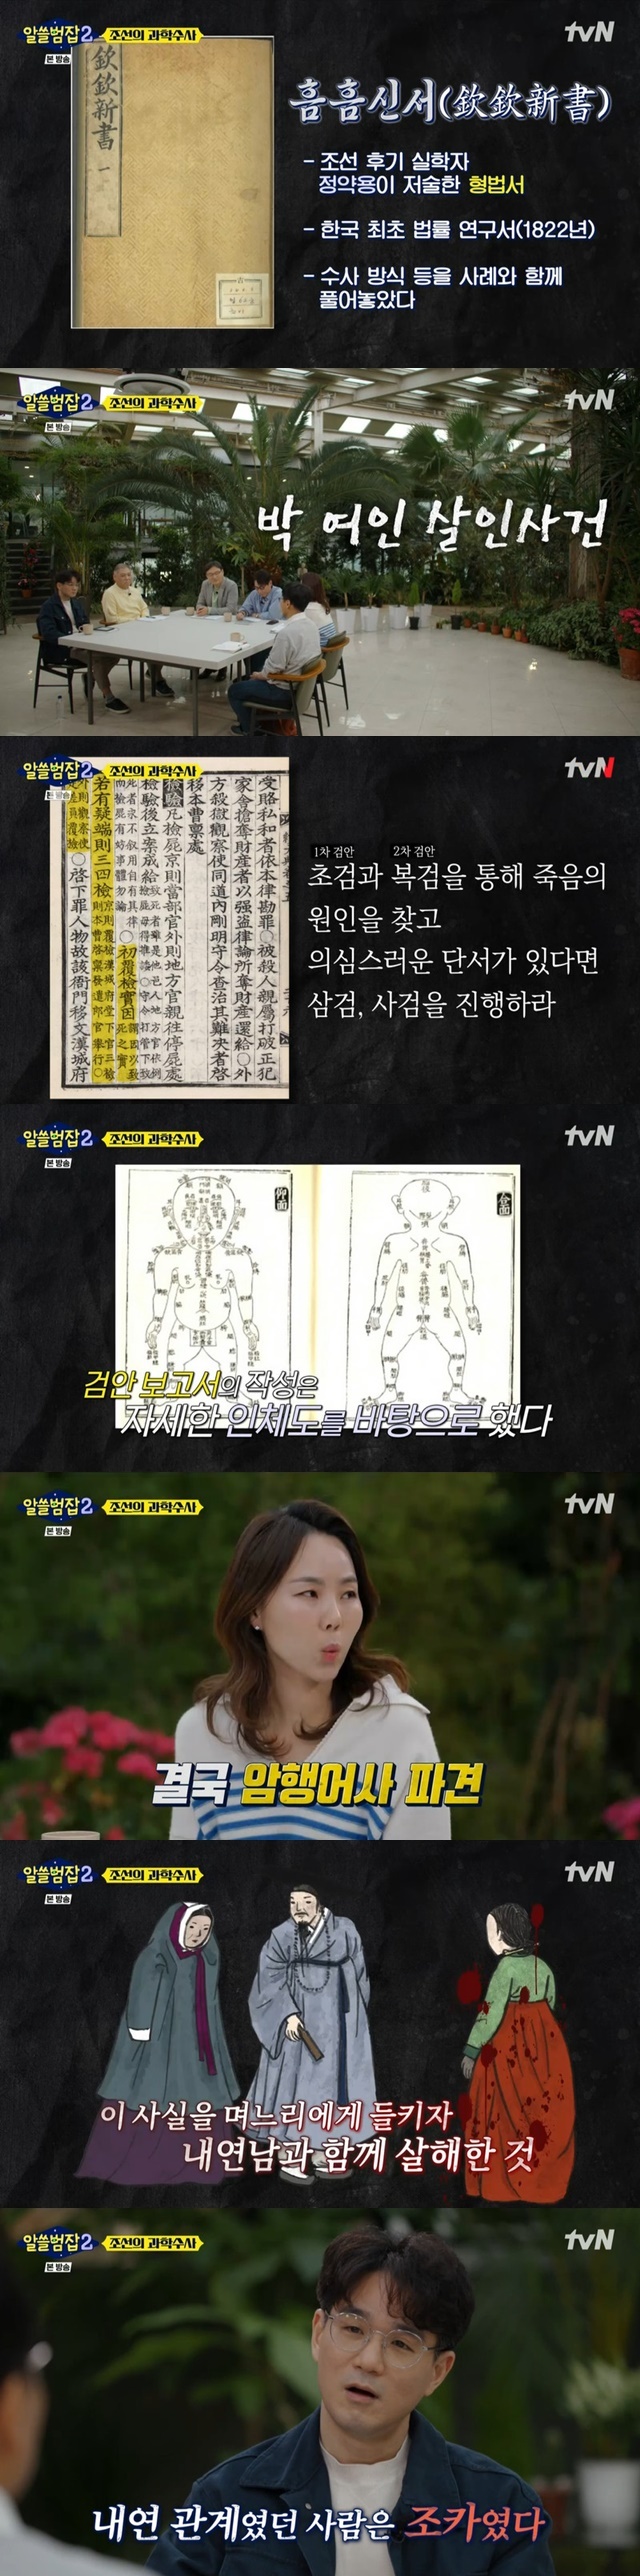 The Murder case recorded in Jeong Yak-yongs Humhum Shinseo was shocked.In TVN ALL-BUM 2, which was broadcast on May 1, we learned about the science of our country in the past with Jeong Yak-yongsThe science of our country is better than expected, said Professor Kim Sang-wook on the show. There is a book to see it.The Jeong Yak-yong book on the book of the Humiliation summarizes a lot of science Susa guidelines and cases, one of which introduced the GLOW Murder case.GLOW, 18, died shortly after his marriage in Pyeongsan, Hwanghae Province, in the eighth year of King Jeongjos reign. Susa was unsettled, and according to the regulations, he made two inspections.The second after the first examination was done when someone else had to agree independently, and if the case was not concluded, the third sword was done. In the first and second examinations, Park GLOW was killed because he could not bear the marriage because he did not have any resistance, but Park GLOWs brother-in-law went to Hanyang and complained that he was unfair when he was exercising.When I went back to the investigation, I found that Park GLOW had several more wounds and the case turned into a murder.The investigation found that Choi had an internal relationship and when his daughter-in-law found out, he Killed.In the mediation, Choi Ji-ji was hanged by his nephew because he could not tolerate it.